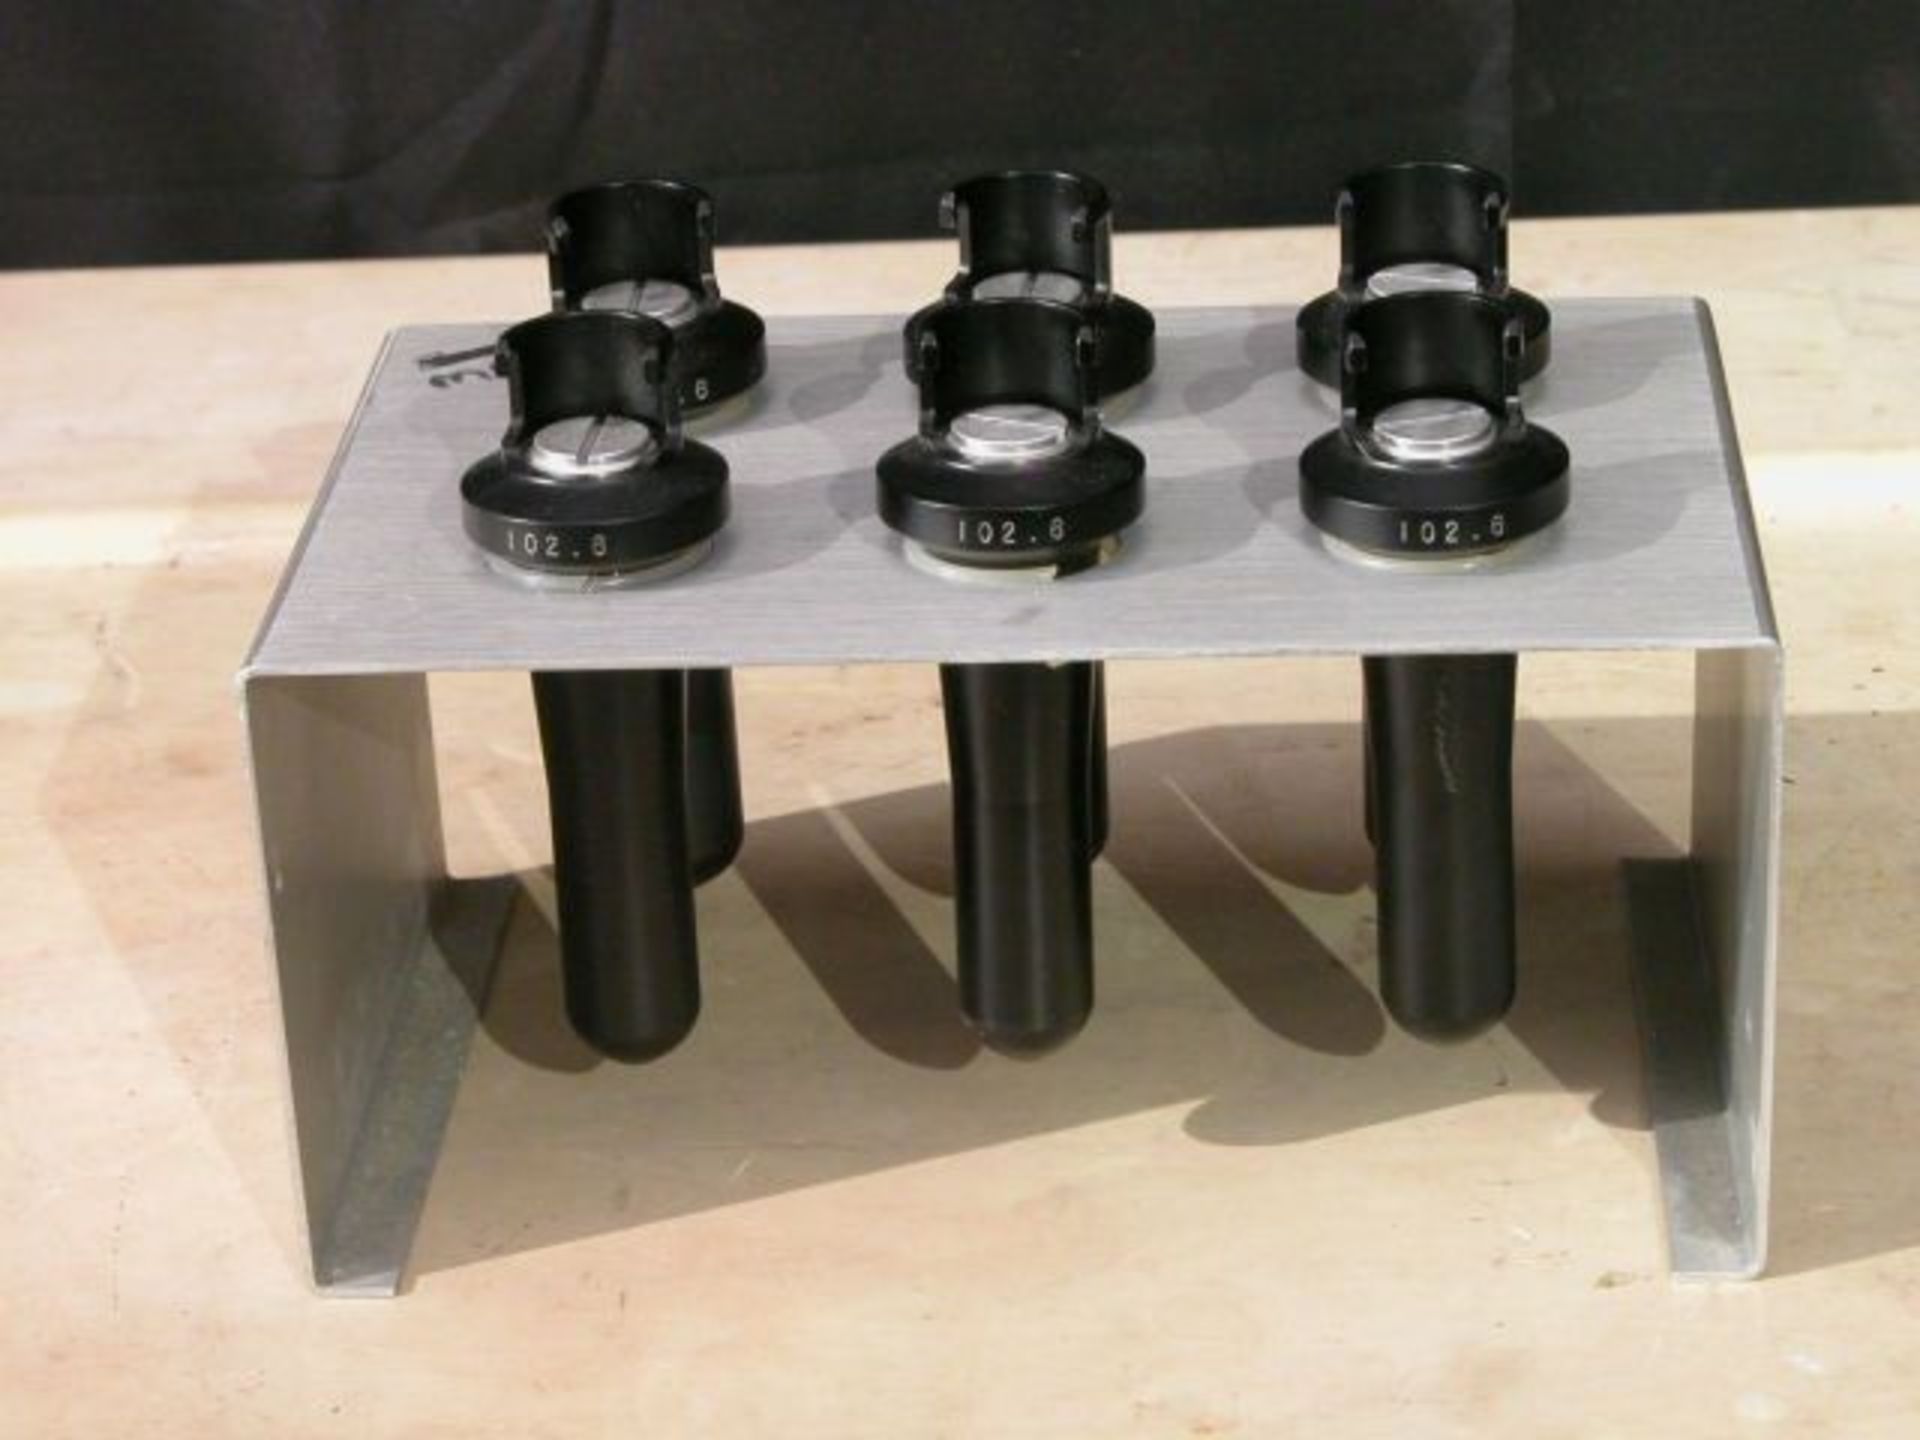 BECKMAN Ultracentrifuge Titanium Swing Out Buckets (6) 102.6 Gms 4 1/4" L, Qty 1, 331267320842